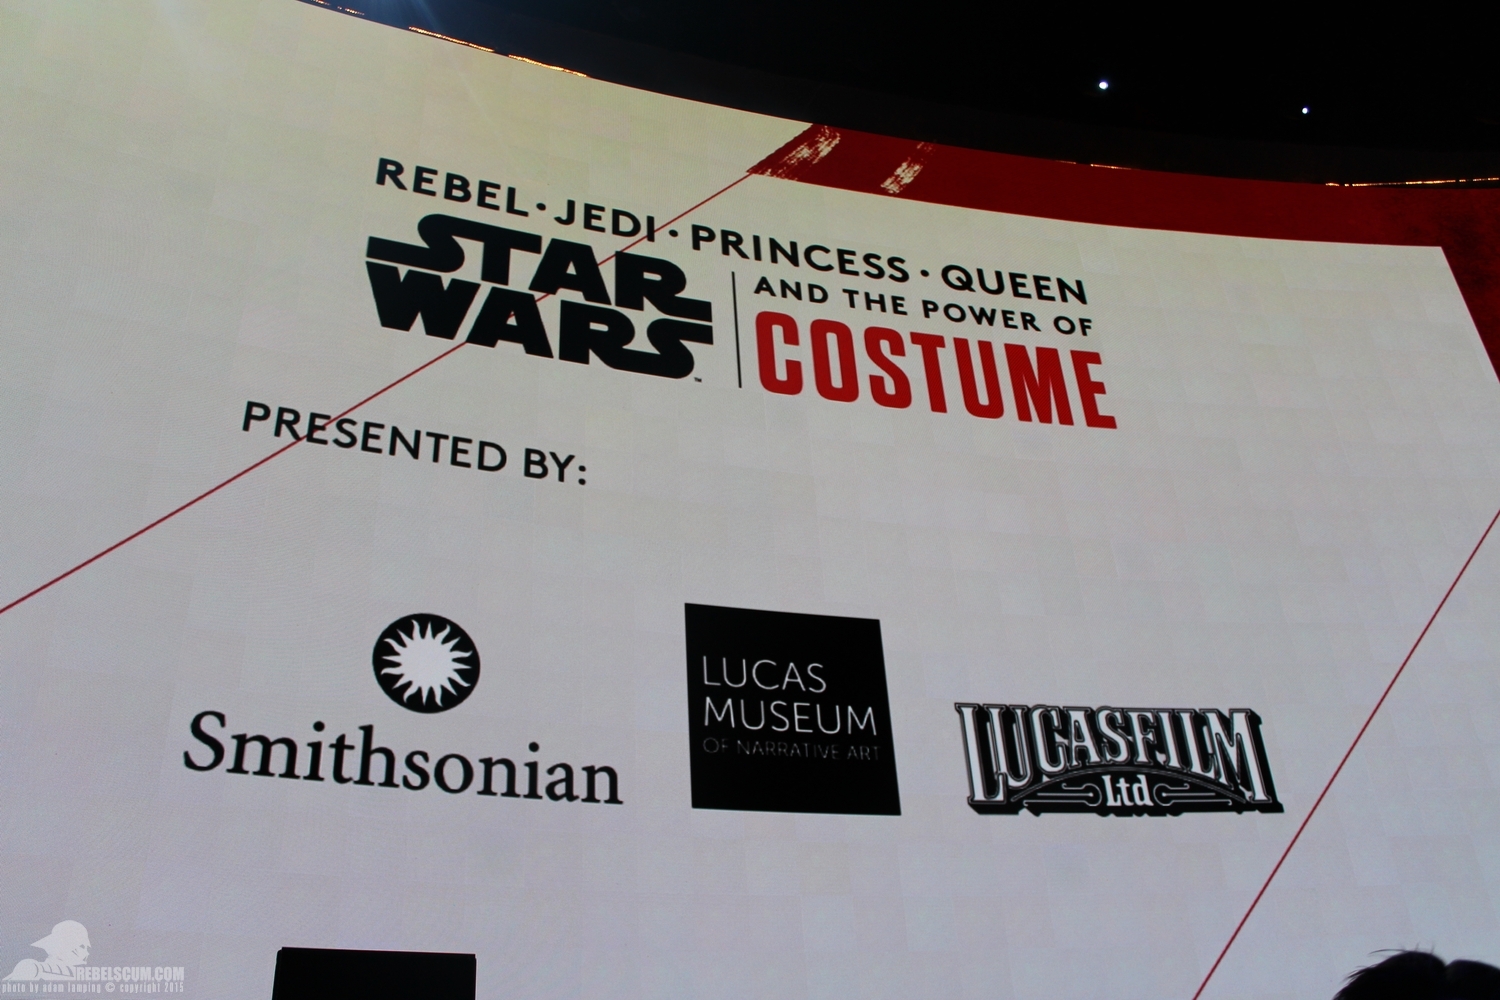 star-wars-the-power-of-costume-seattle-emp-museum-launch-party-013015-001.JPG